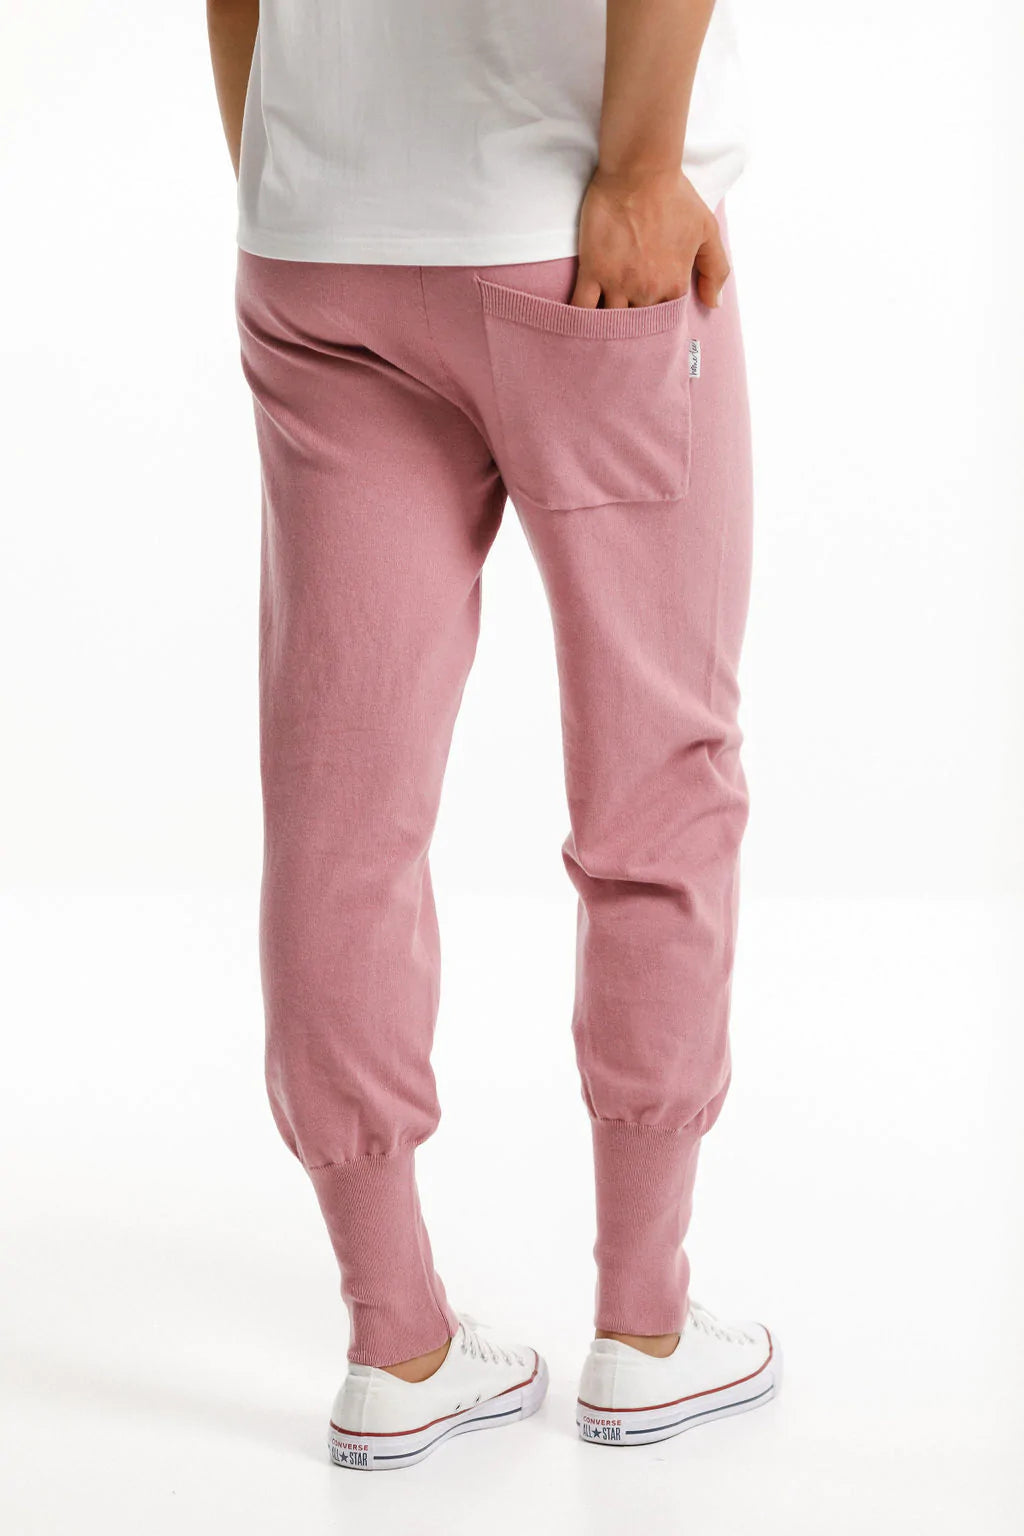 Knit Loungers Rose Bud - HOME LEE Pant 